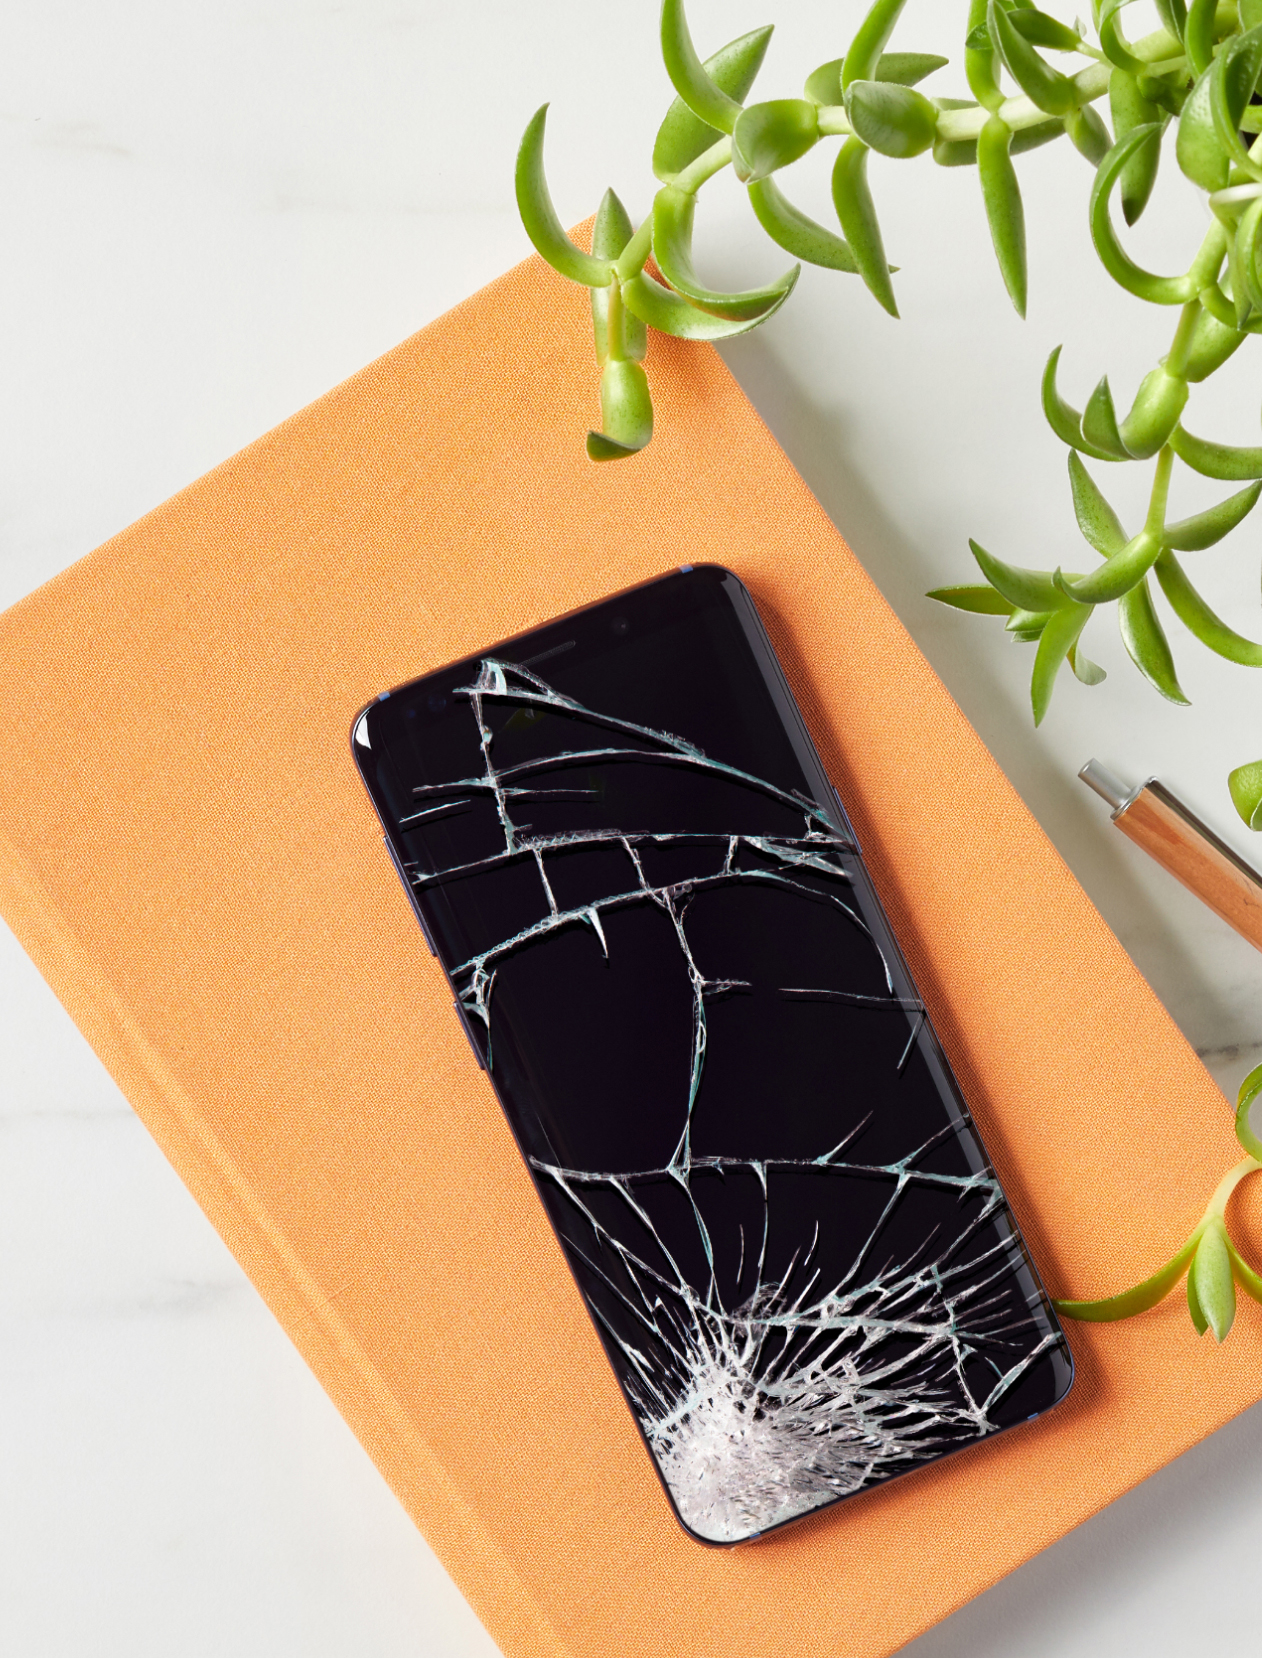 Smartphone with a cracked screen sits atop a desk